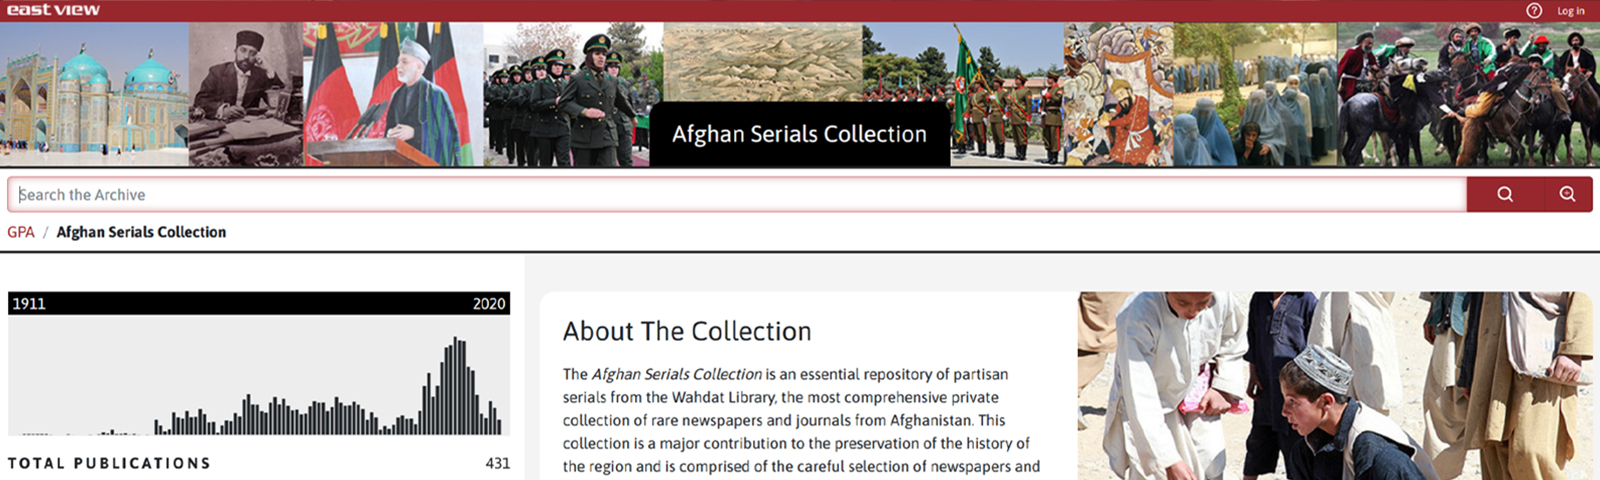 Screenshot of the homepage of the Afghan Serials Collection website